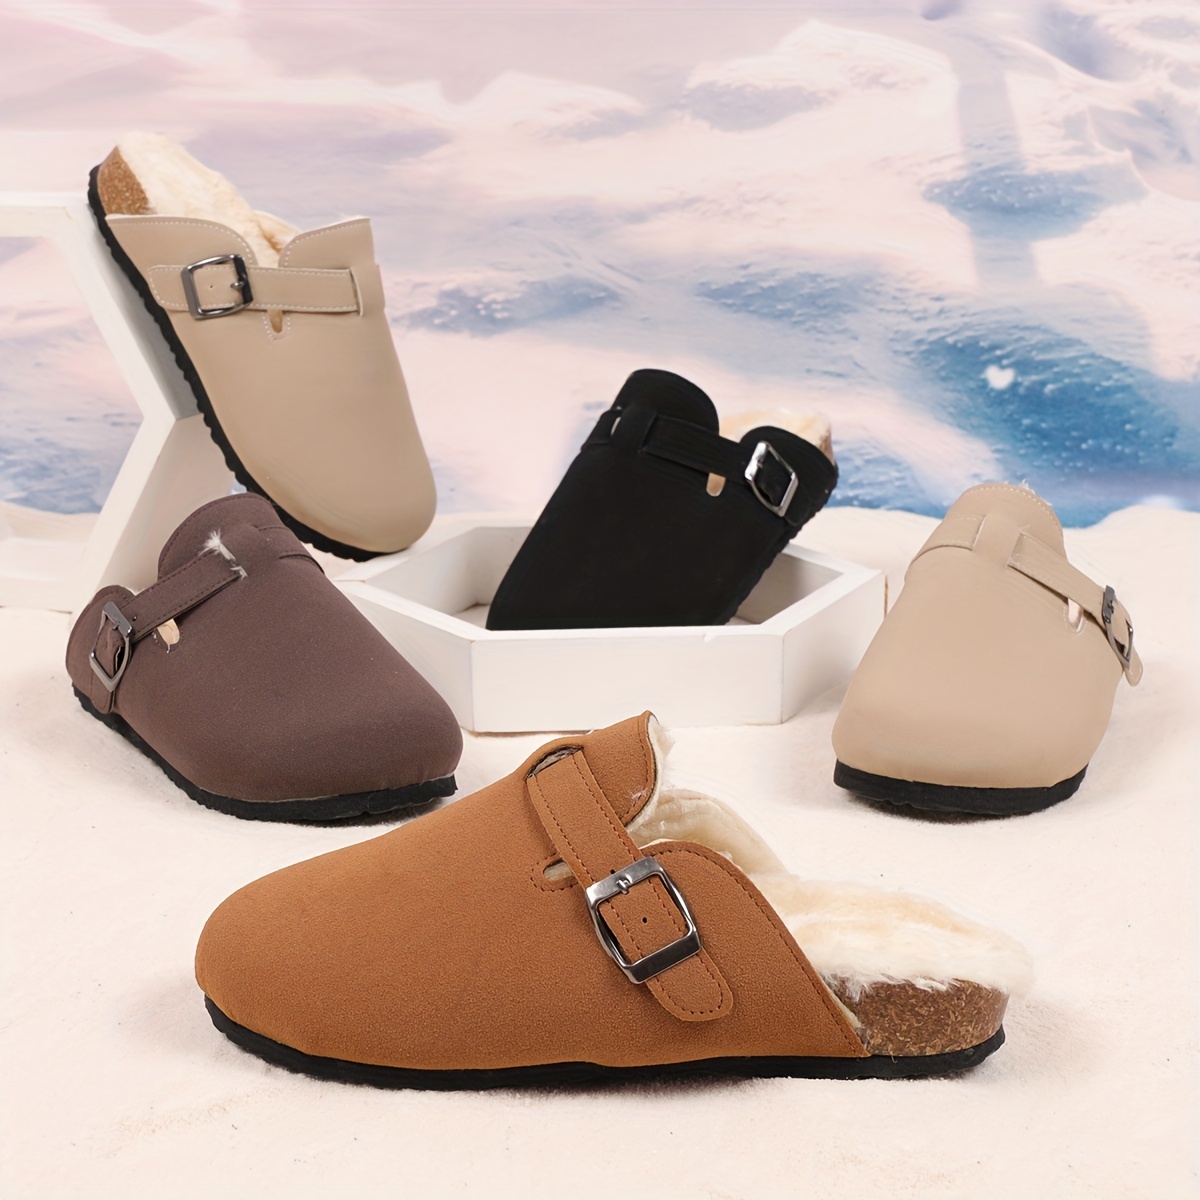 Women’s Buckle Strap Detailed Mules, Casual Slip On Plush Lined Shoes, Comfortable Flat Winter Shoes